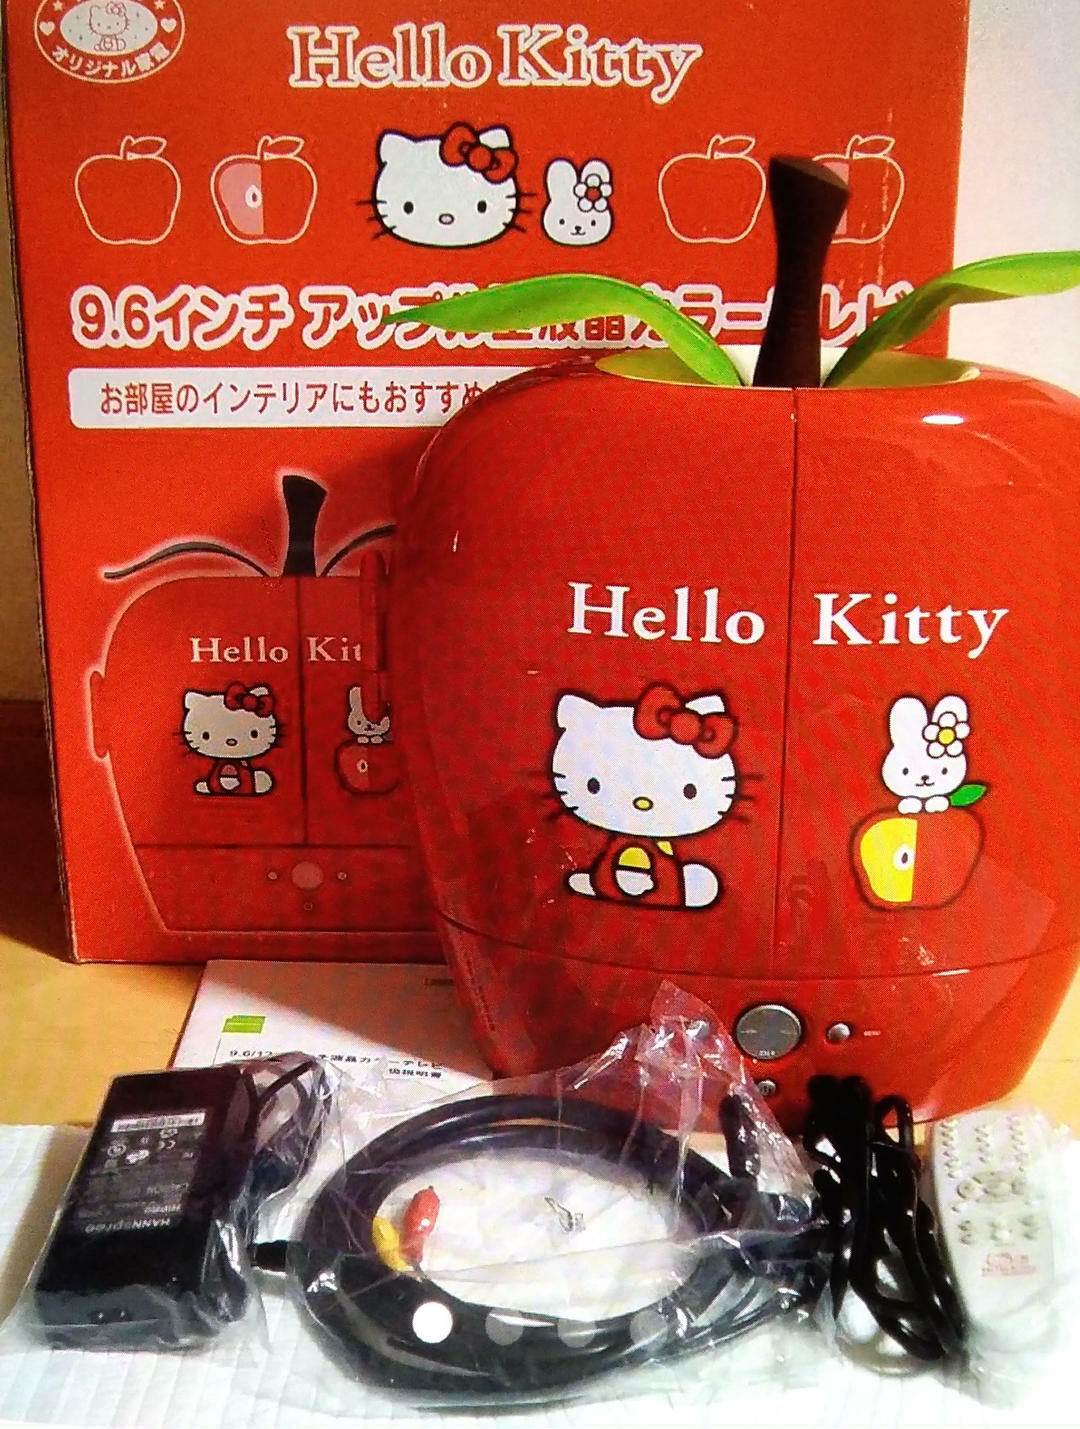 Sanrio Hello kitty Apple TV 9.6 inch LCD From Japan Excellent